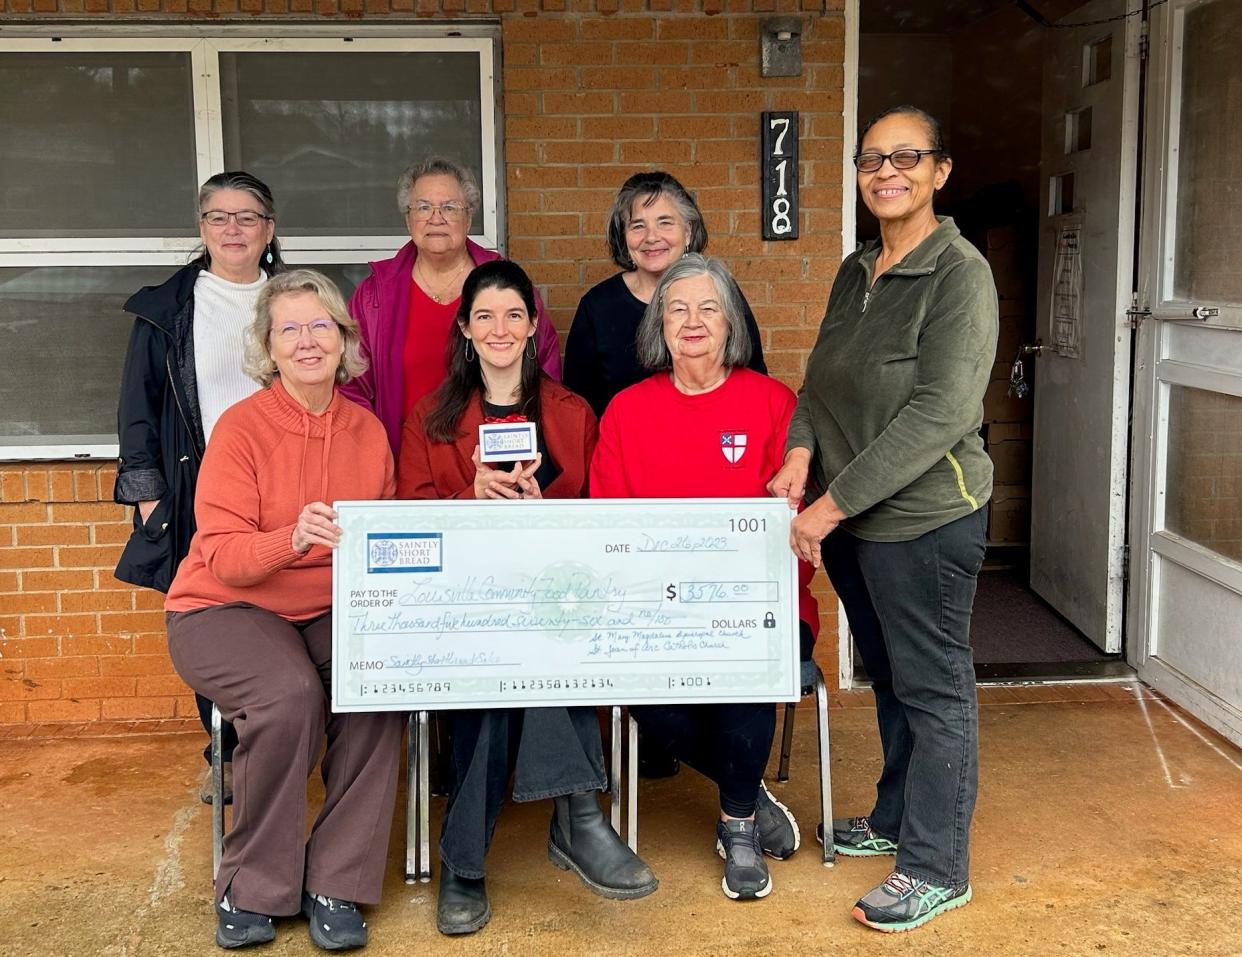 Blanche Greene (at left) and Mary Caran (center back) accept a $3,576 donation from Saintly Short Bread organizers Tish Easterlin , Lilli Agel, Pam Franklin, Lil Easterlin, and Hulet Kitterman.